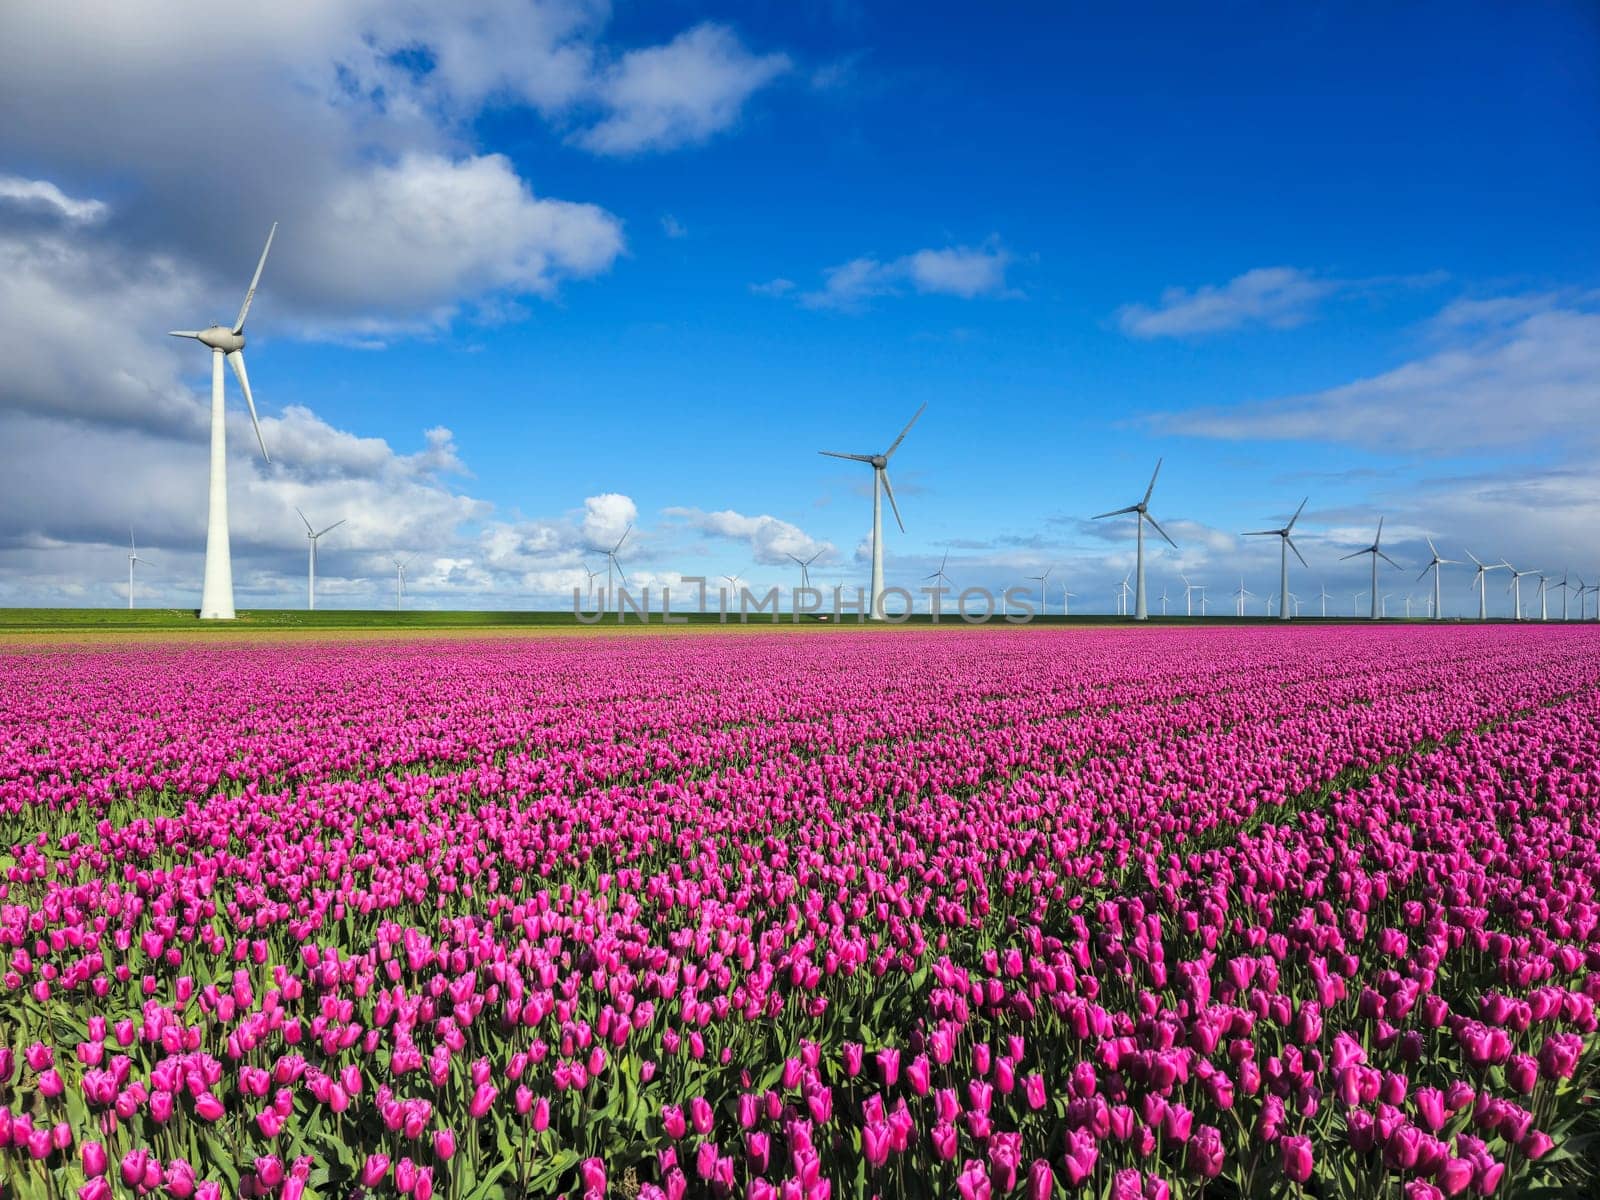 A mesmerizing sight of a vast field of purple tulips dancing in the wind, with majestic windmill turbines standing tall in the background under the clear Spring sky in the Noordoostpolder Netherlands